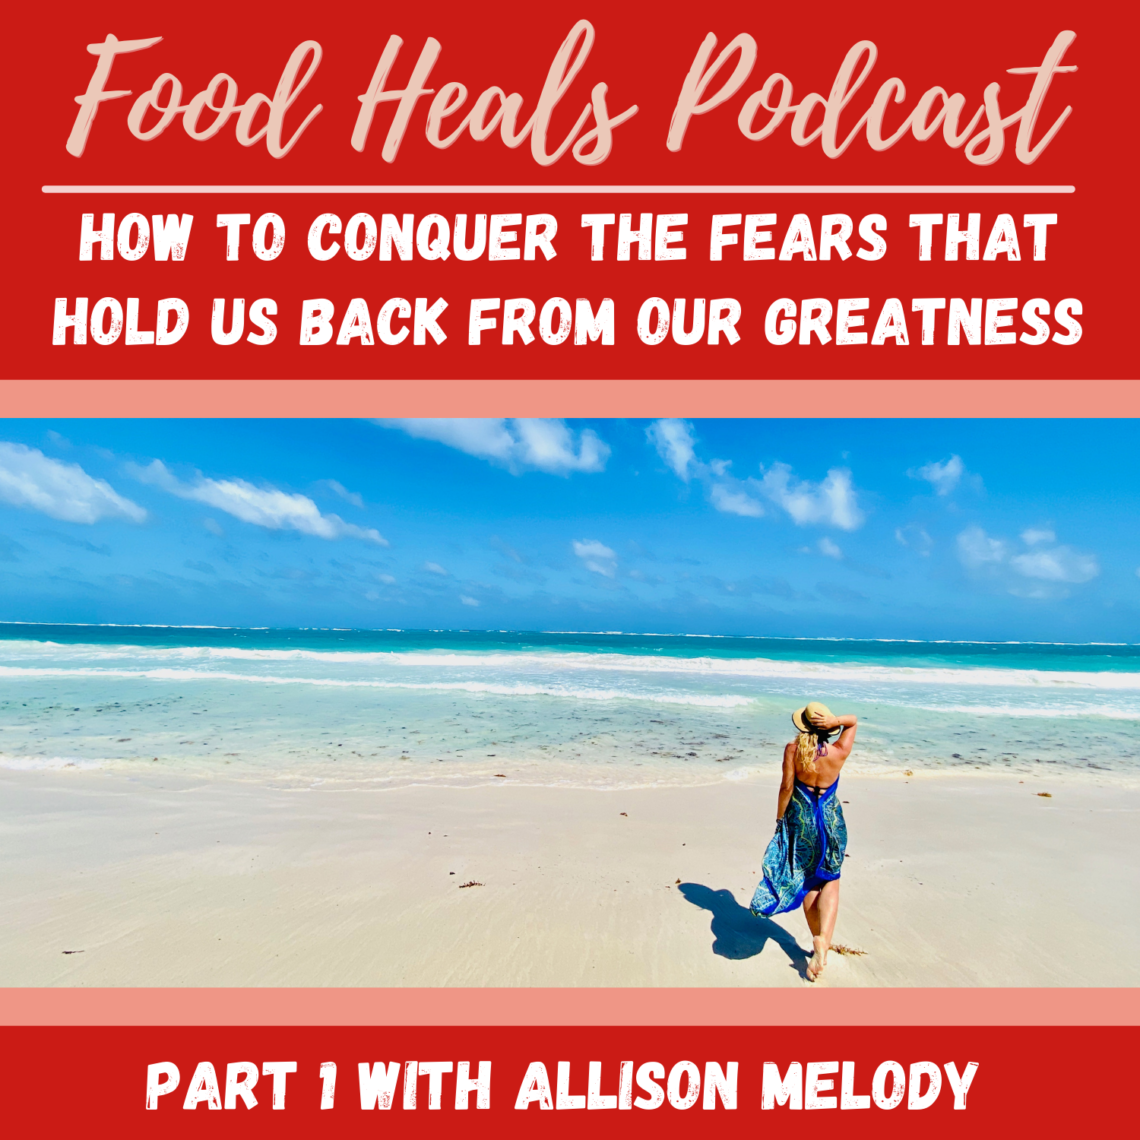 How to Conquer the Fears That Hold Us Back From Our Greatness (Part 1) on The Food Heals Podcast with Allison Melody